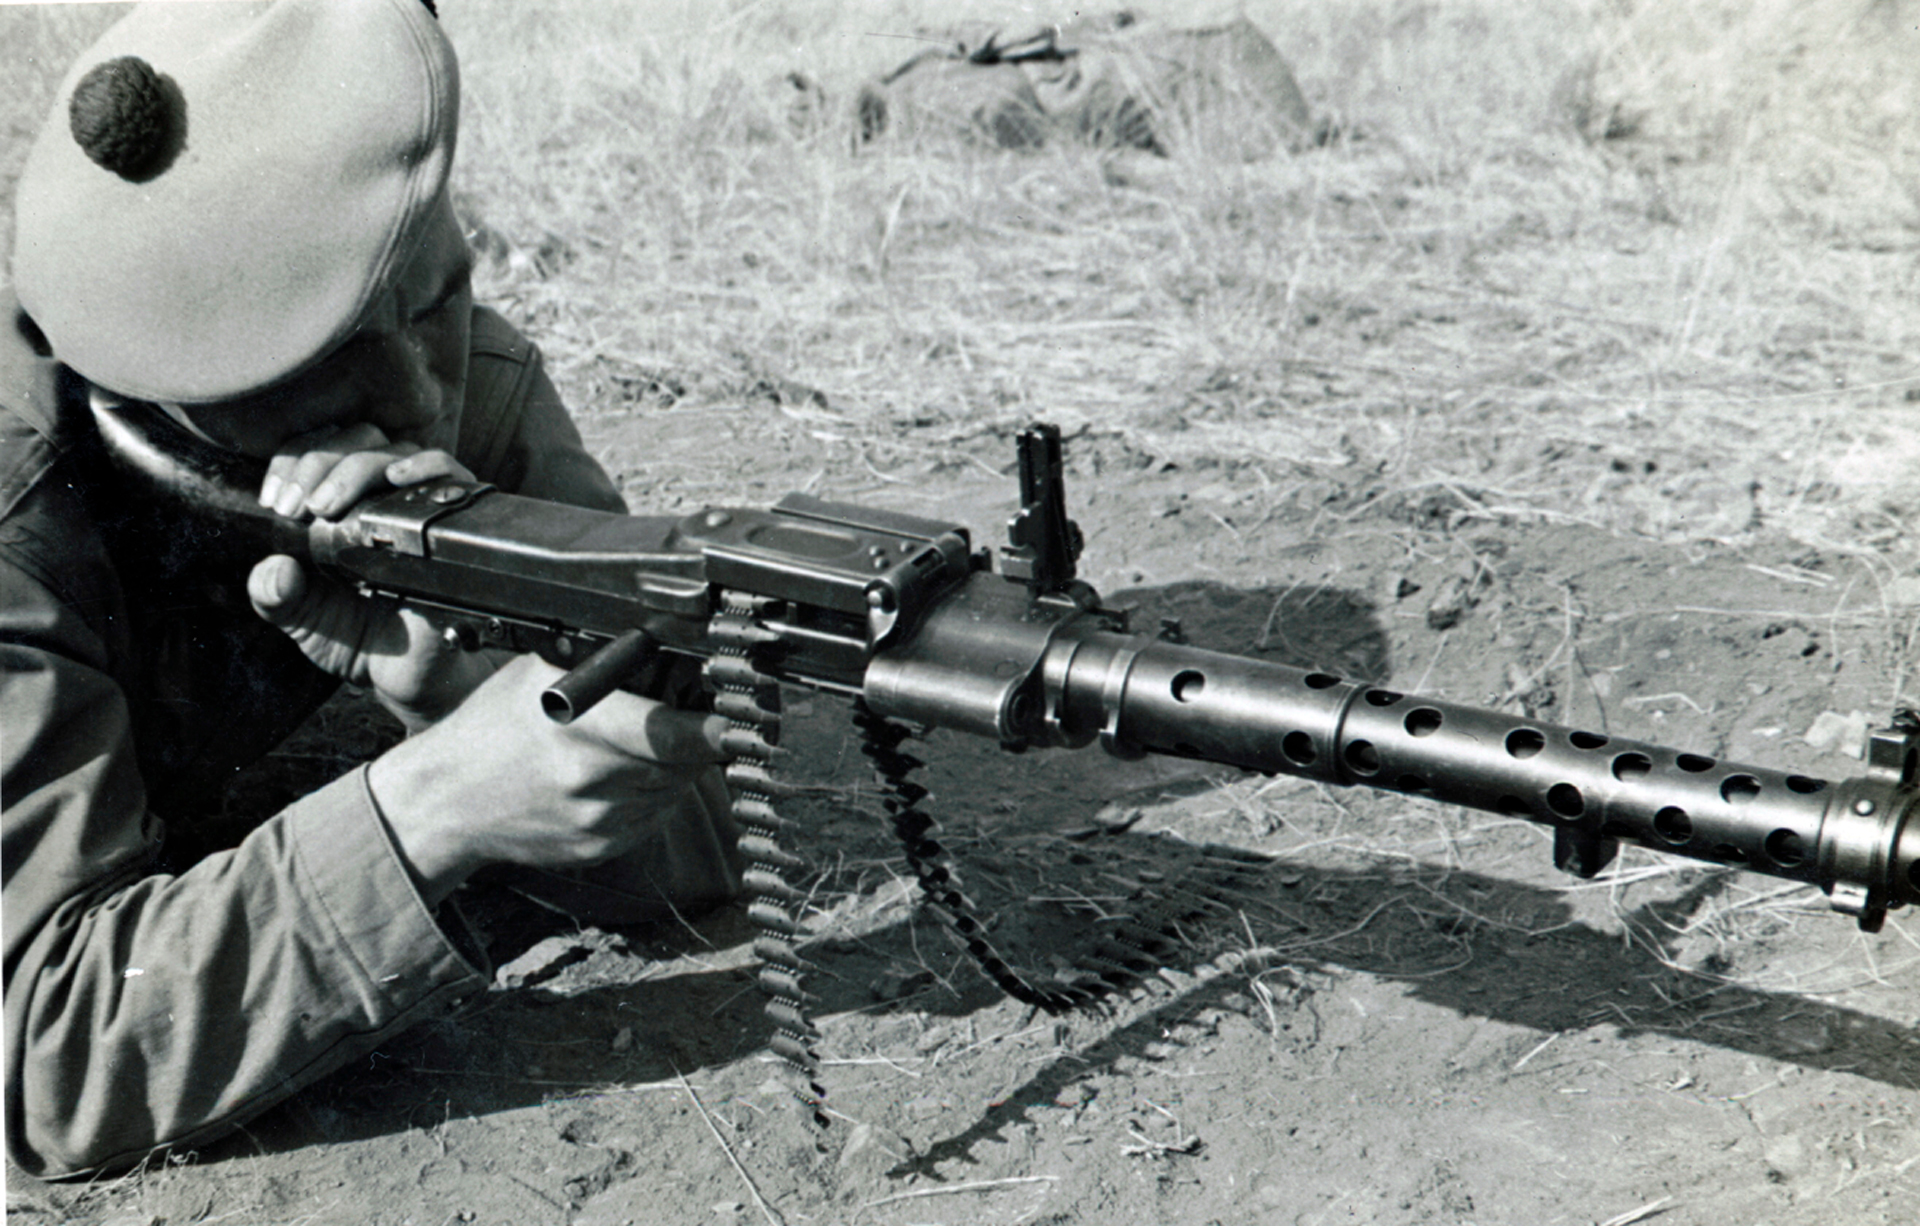 4)	The Canadians provided combat experience including first-hand knowledge of German small arms. Here a Canadian member of the FSSF demonstrates the German MG34.  Author’s collection